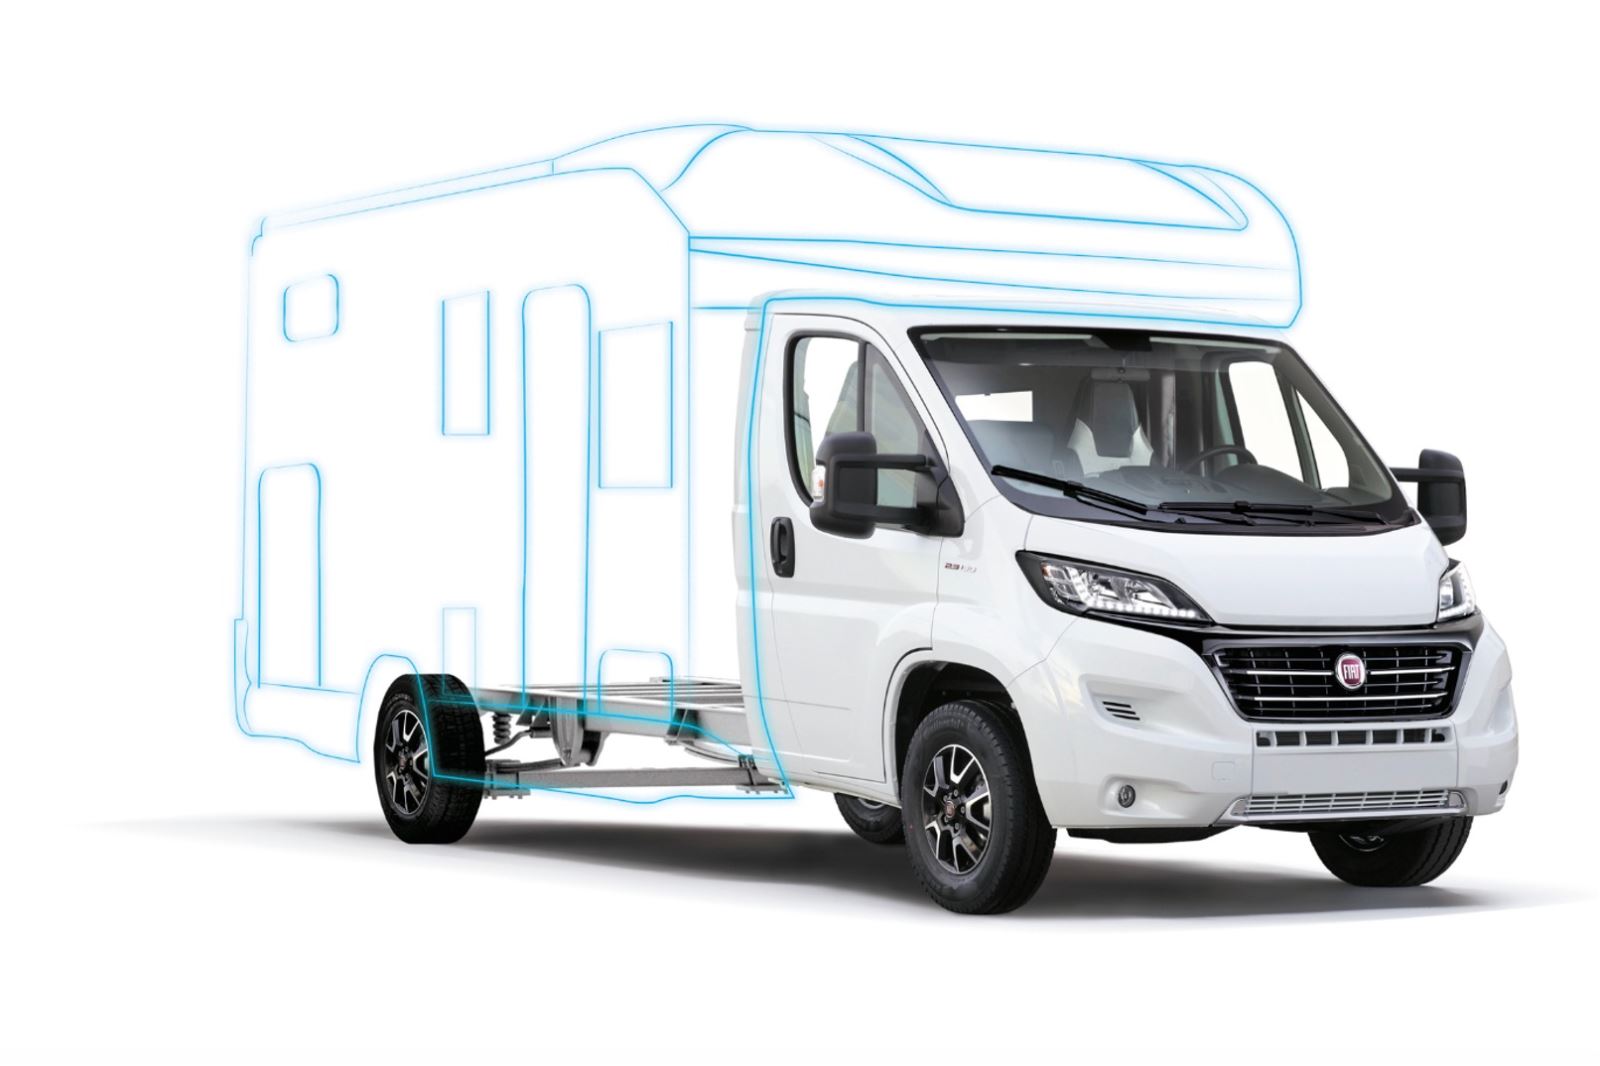 Fiat Ducato to be converted into a motorhome